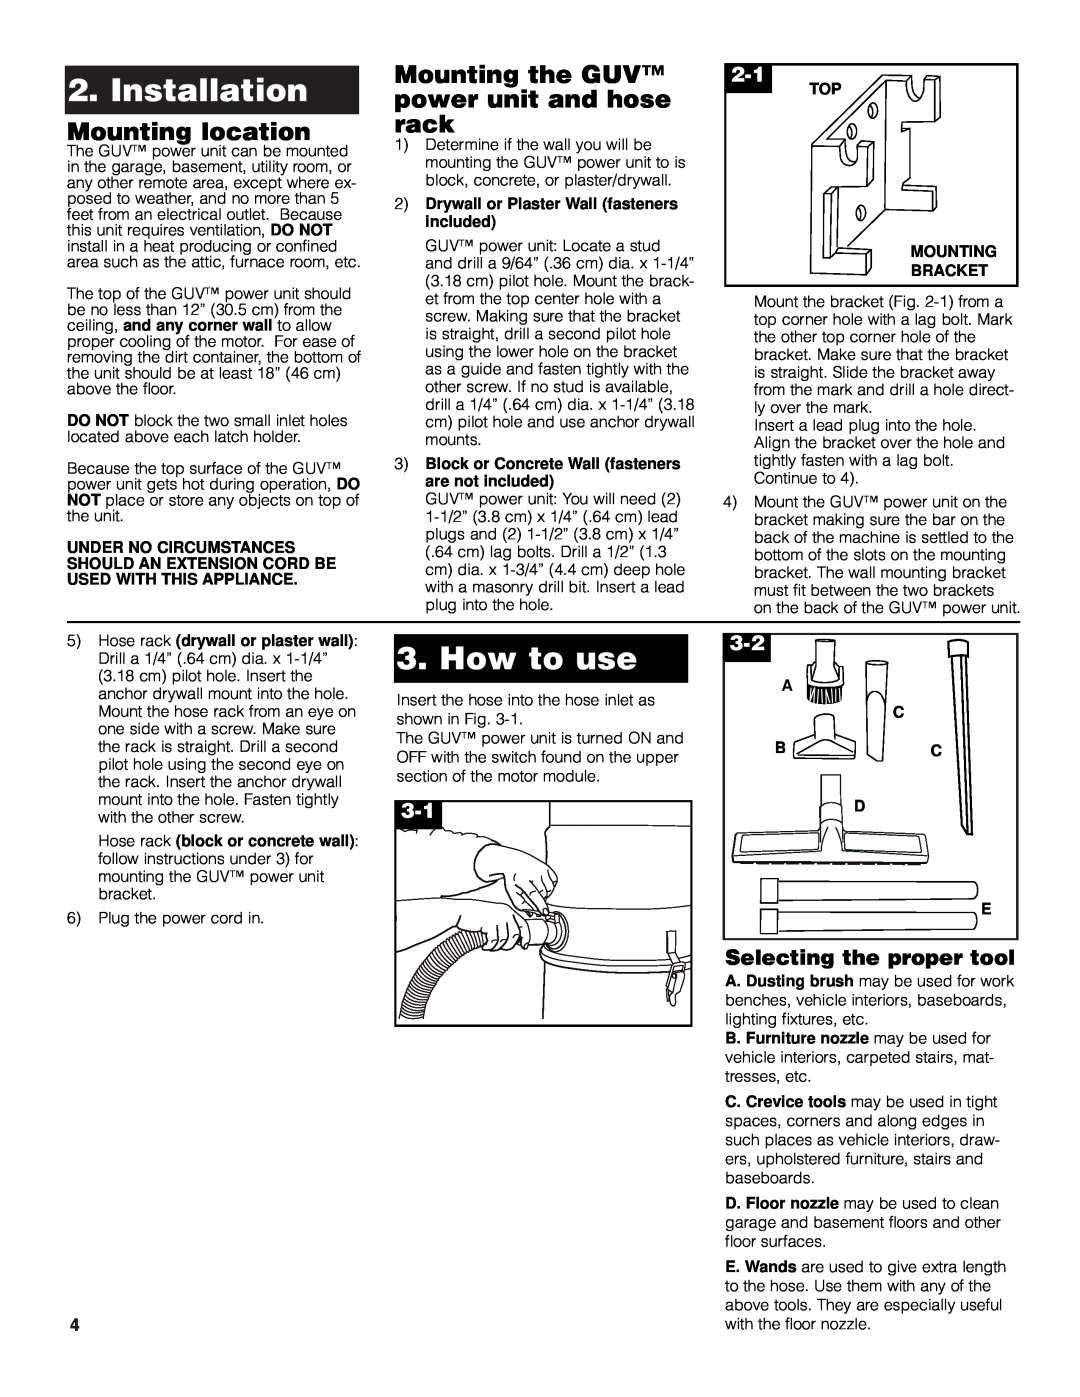 Hoover L2310 owner manual Installation, How to use, Mounting location, Mounting the GUV power unit and hose rack 